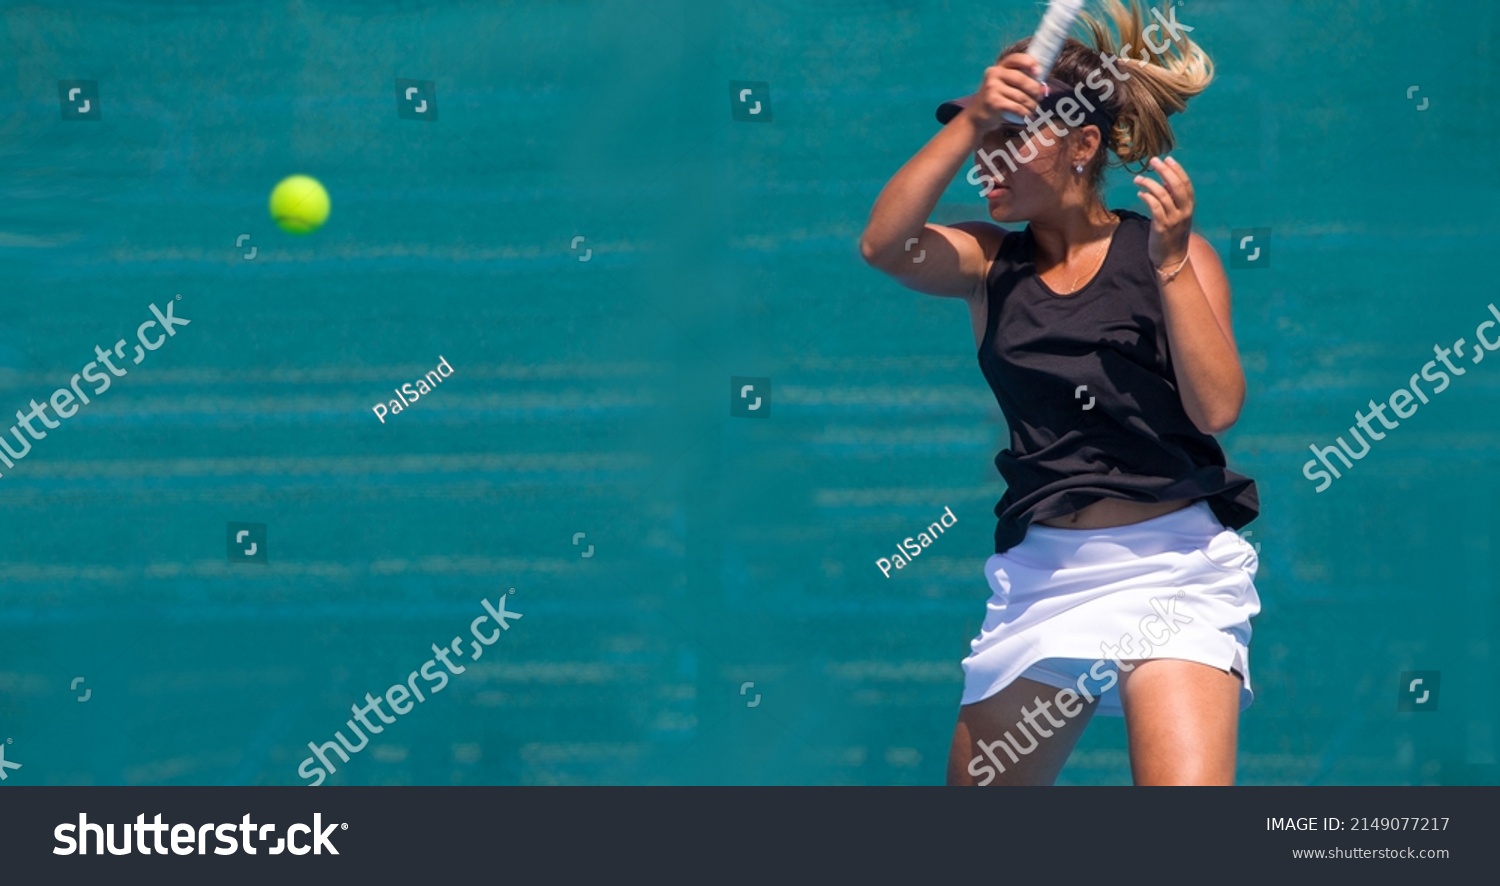 A girl plays tennis on a court with a hard blue surface on a summer sunny day
 #2149077217